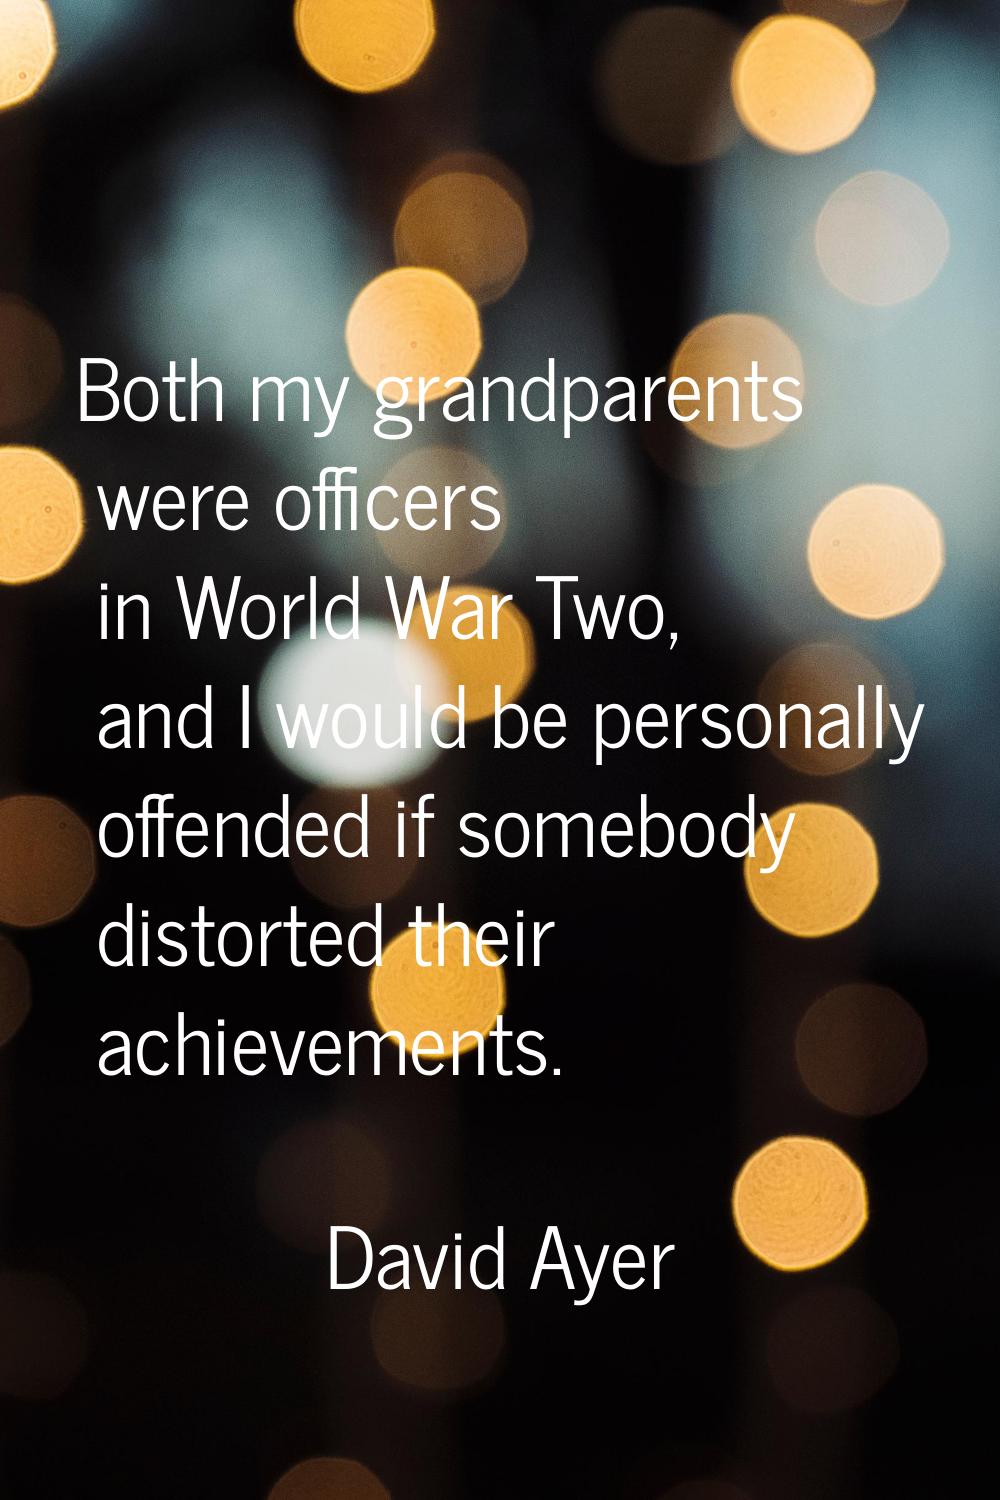 Both my grandparents were officers in World War Two, and I would be personally offended if somebody